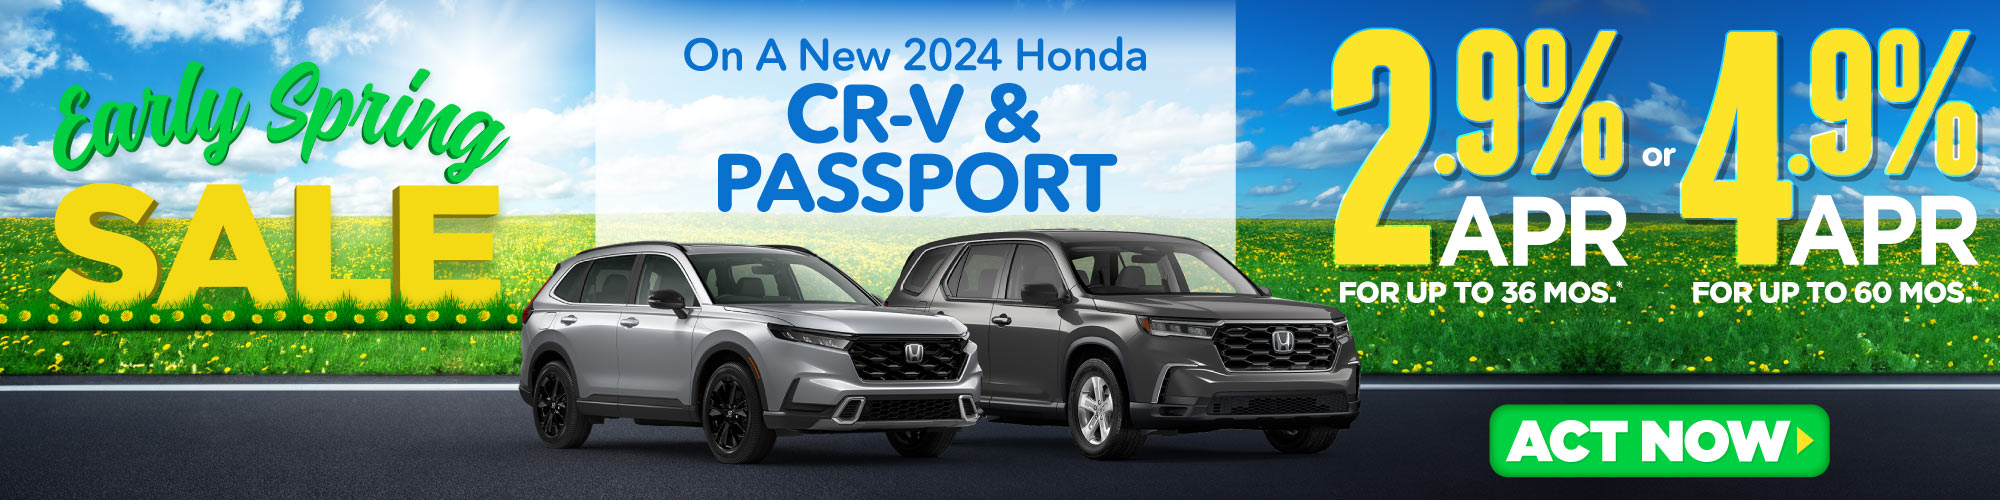 New 2022 Honda Accord or Civic or Insight | As Low as 2.9% APR Available | Act Now